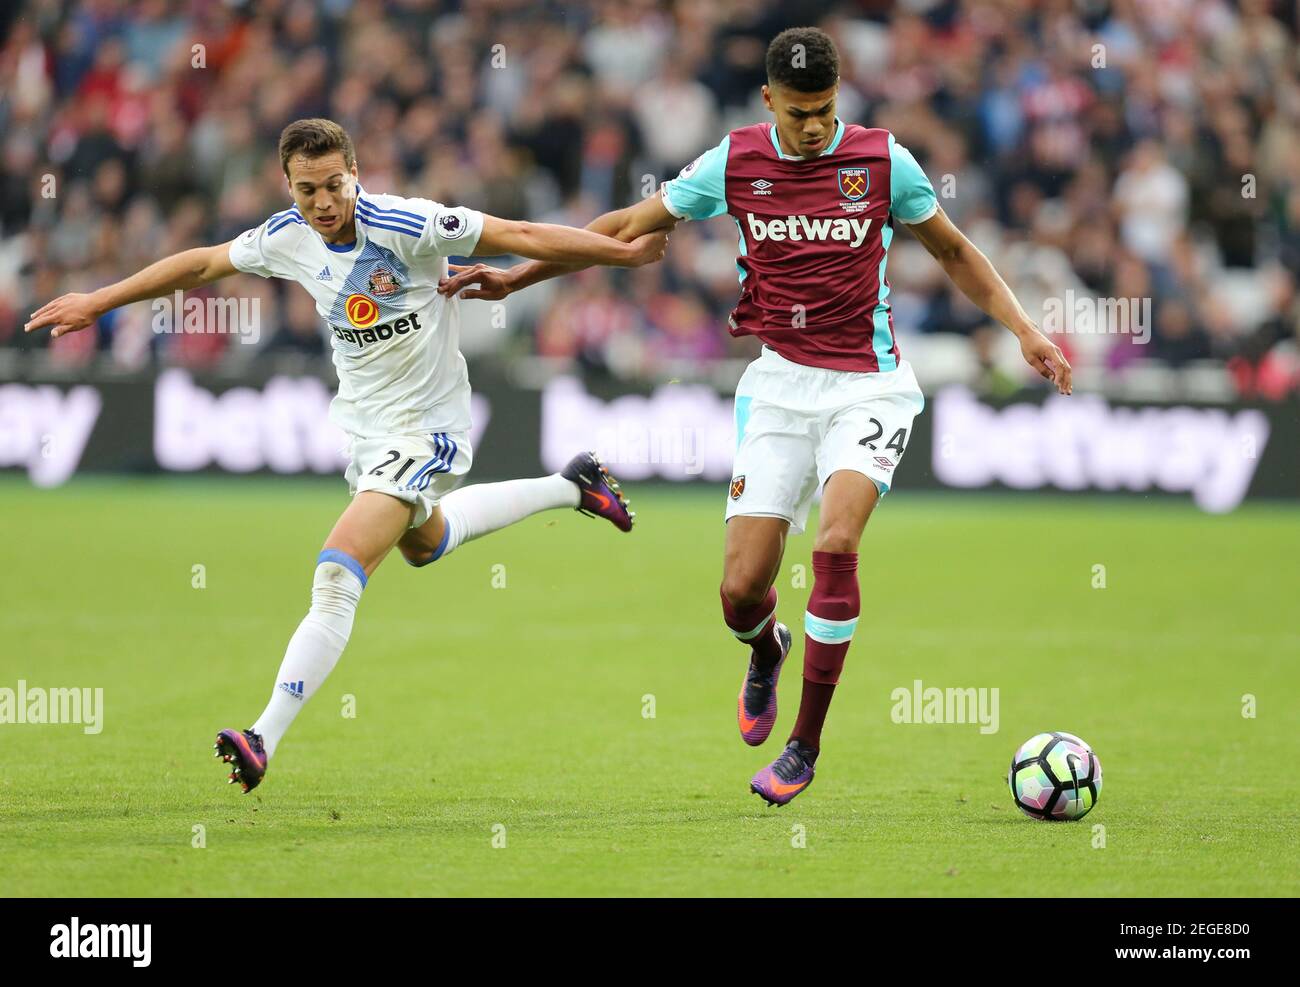 Britain Soccer Football - West Ham United v Sunderland - Premier League - London Stadium - 22/10/16 Sunderland's Javi Manquillo in action with West Ham United's Ashley Fletcher  Reuters / Paul Hackett Livepic EDITORIAL USE ONLY. No use with unauthorized audio, video, data, fixture lists, club/league logos or 'live' services. Online in-match use limited to 45 images, no video emulation. No use in betting, games or single club/league/player publications.  Please contact your account representative for further details. Stock Photo